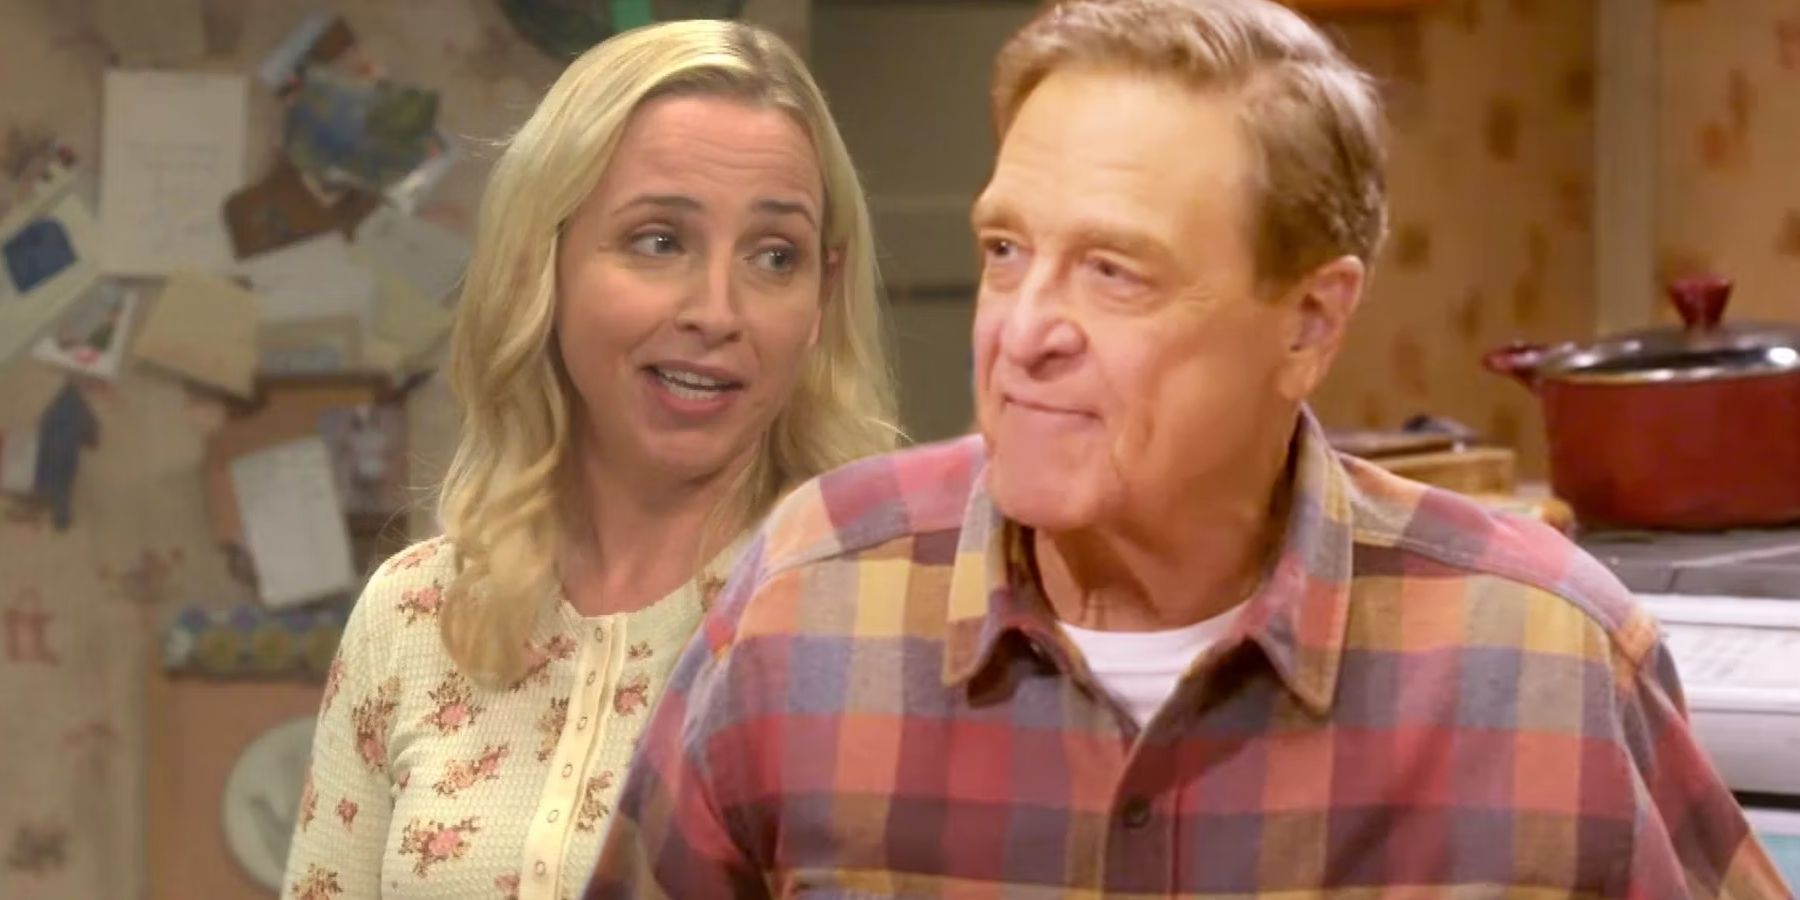 Lecy Goranson as Becky Conner speaking  and John Goodman as Dan Conner looking satisfied in The Conners.